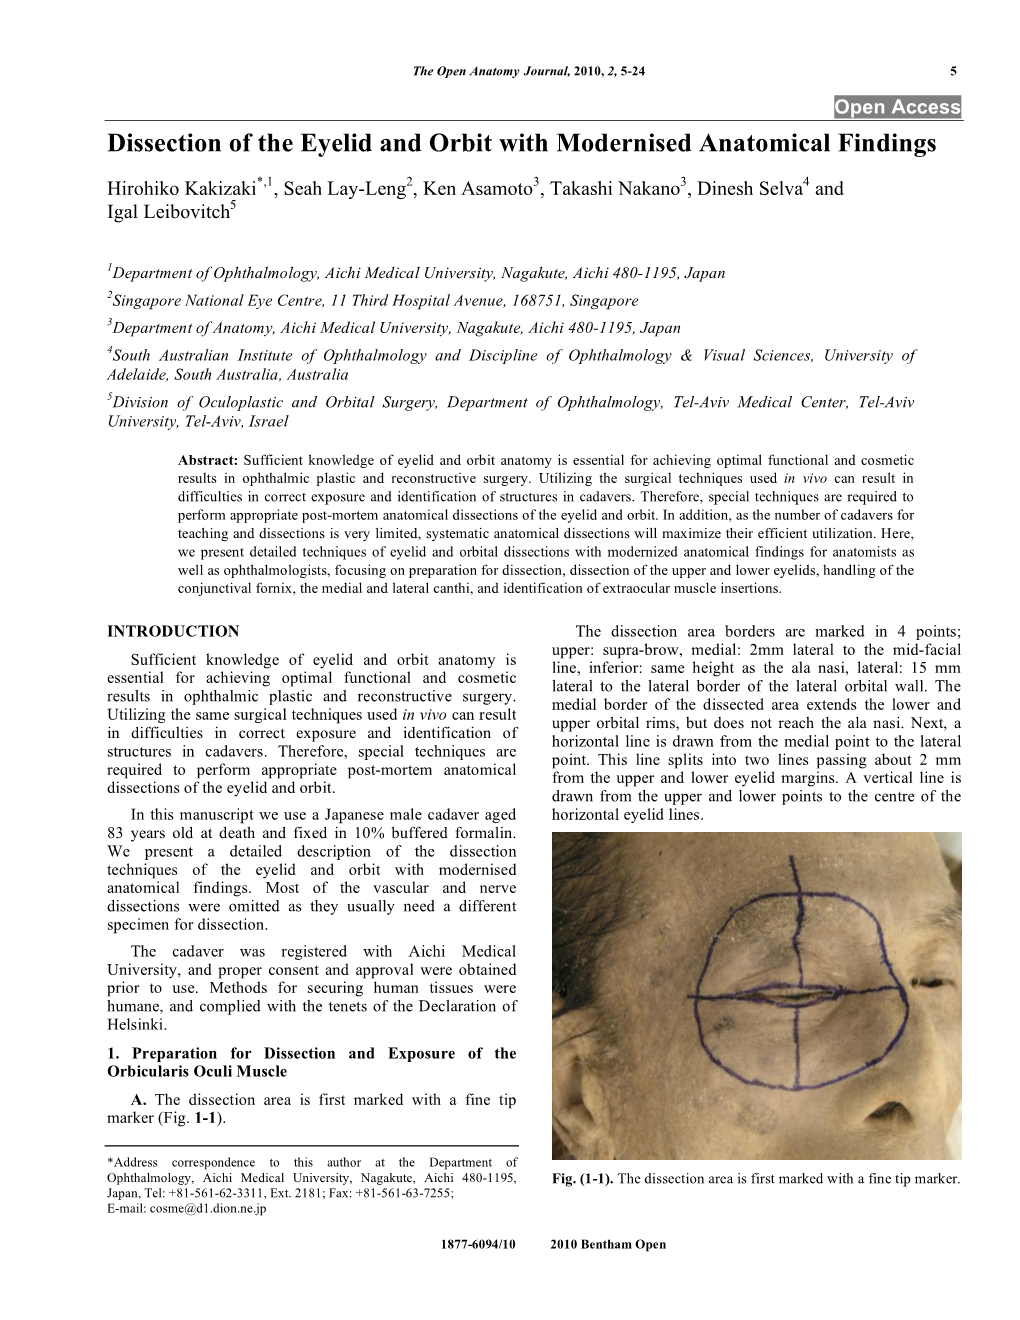 Dissection of the Eyelid and Orbit with Modernised Anatomical Findings